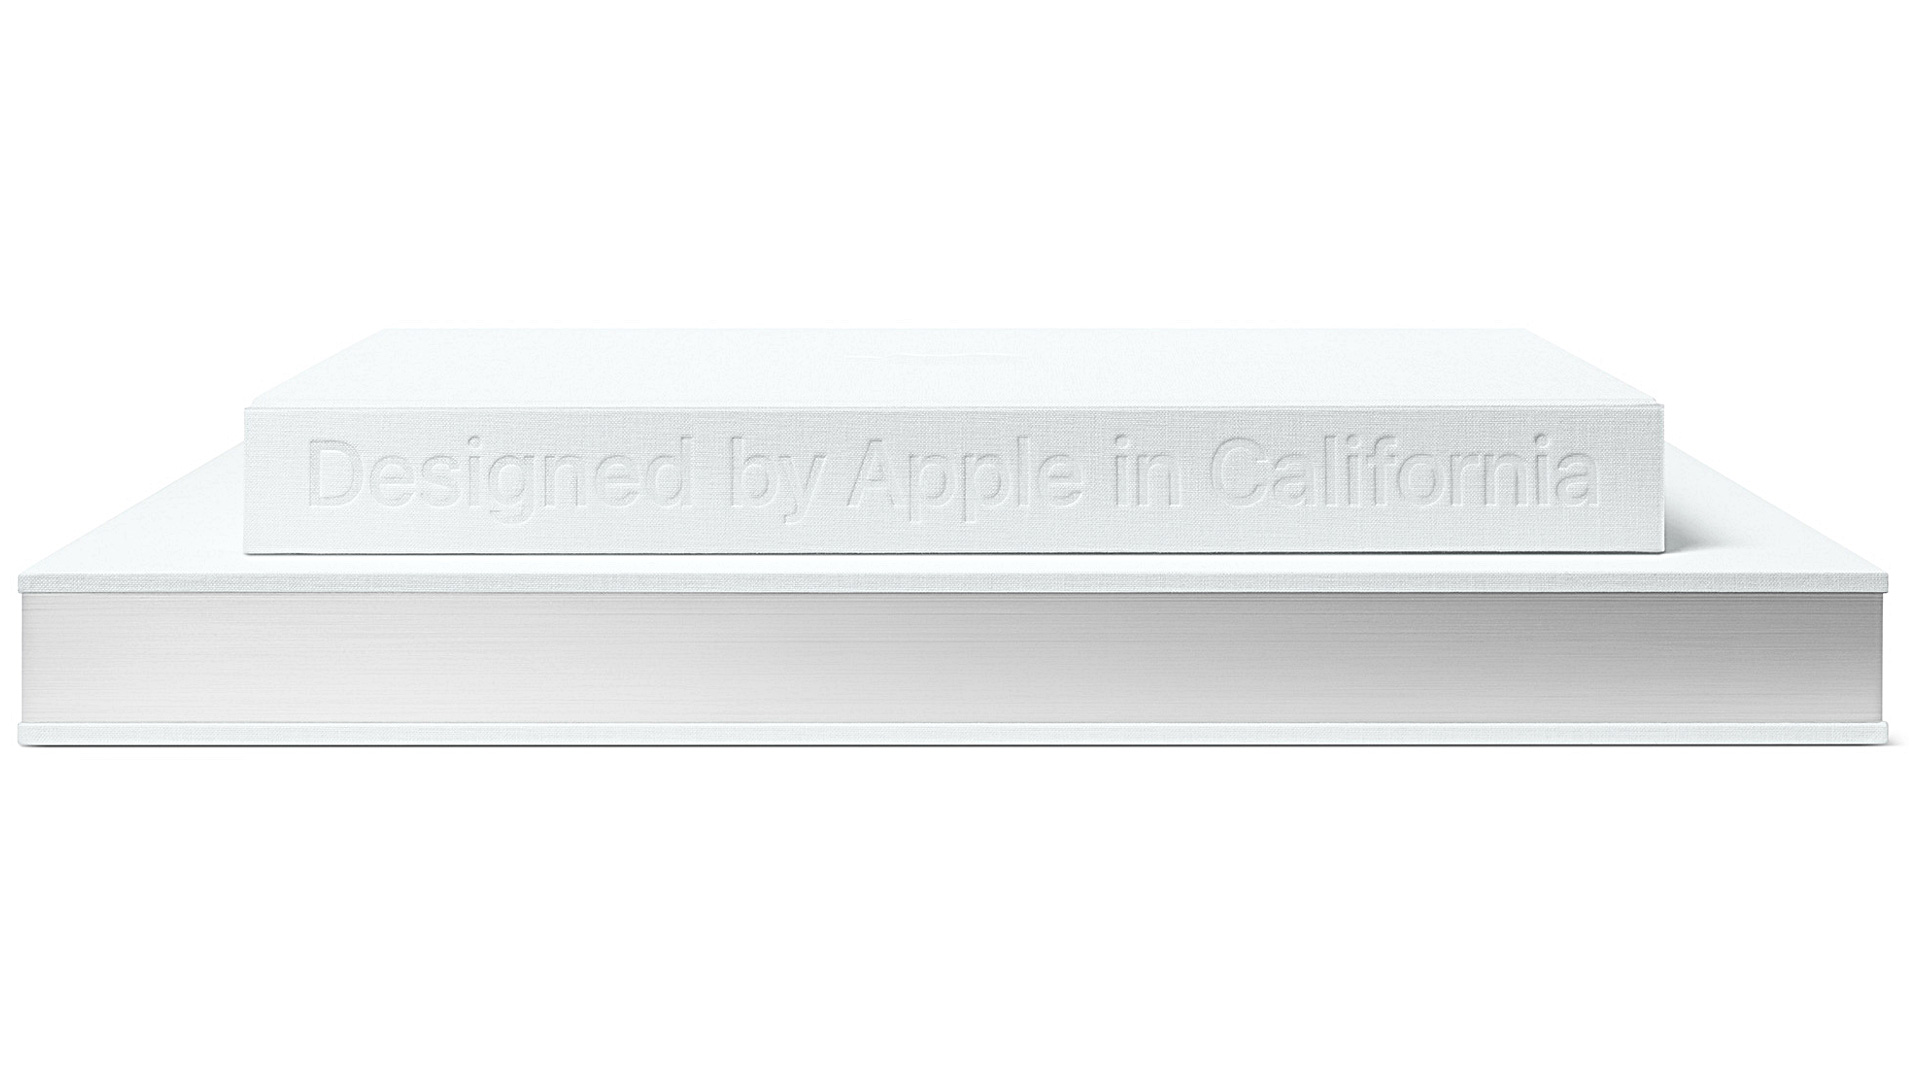 designed-by-apple-in-california-1